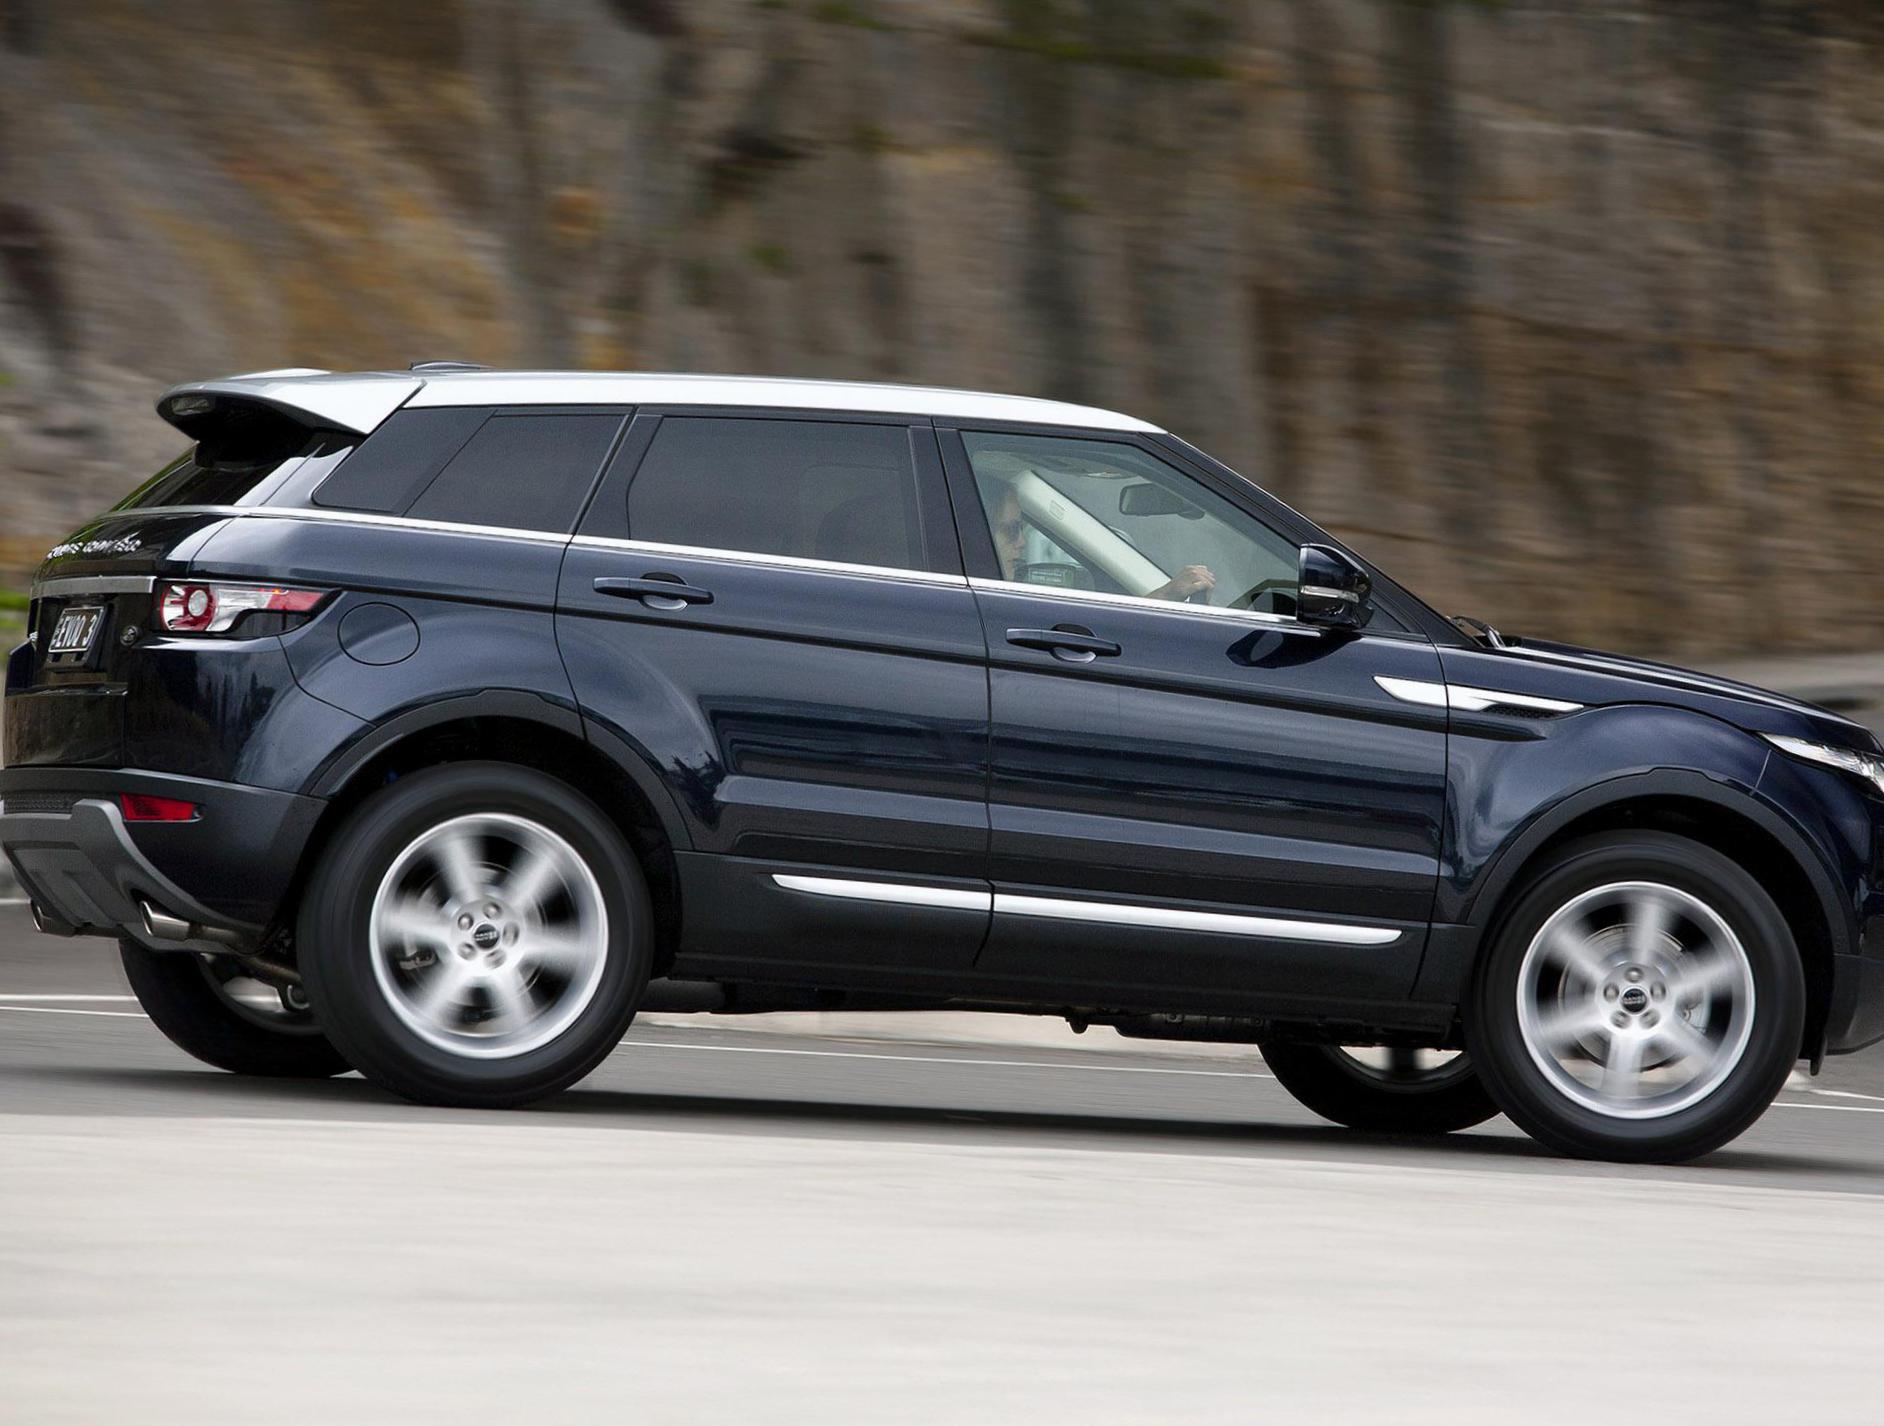 Land Rover Range Rover Evoque Coupe Specifications suv